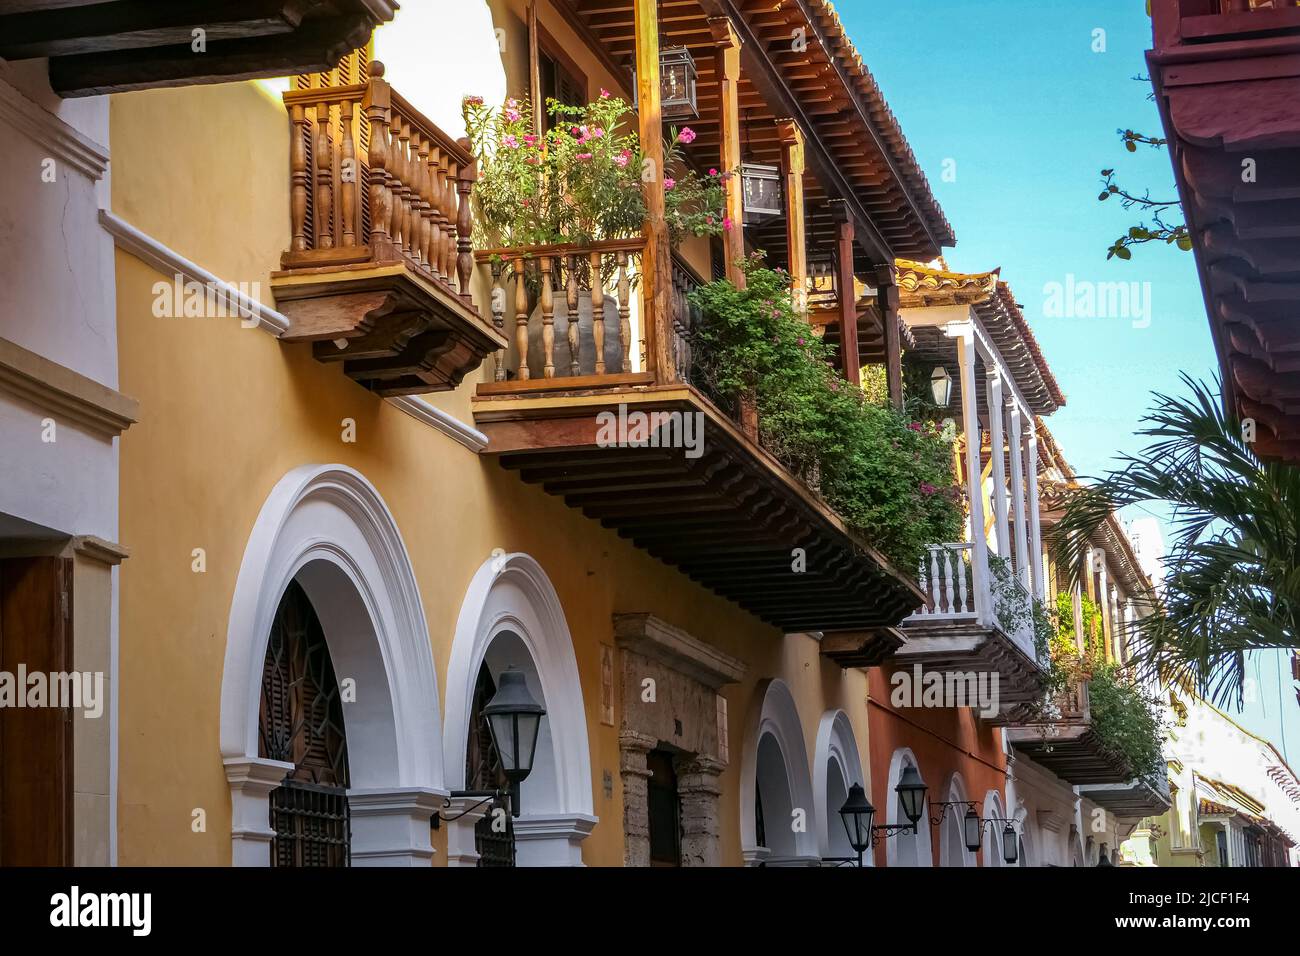 View to artful wooden balconies of historic houses in a narrow street in Cartagena, Colombia Stock Photo